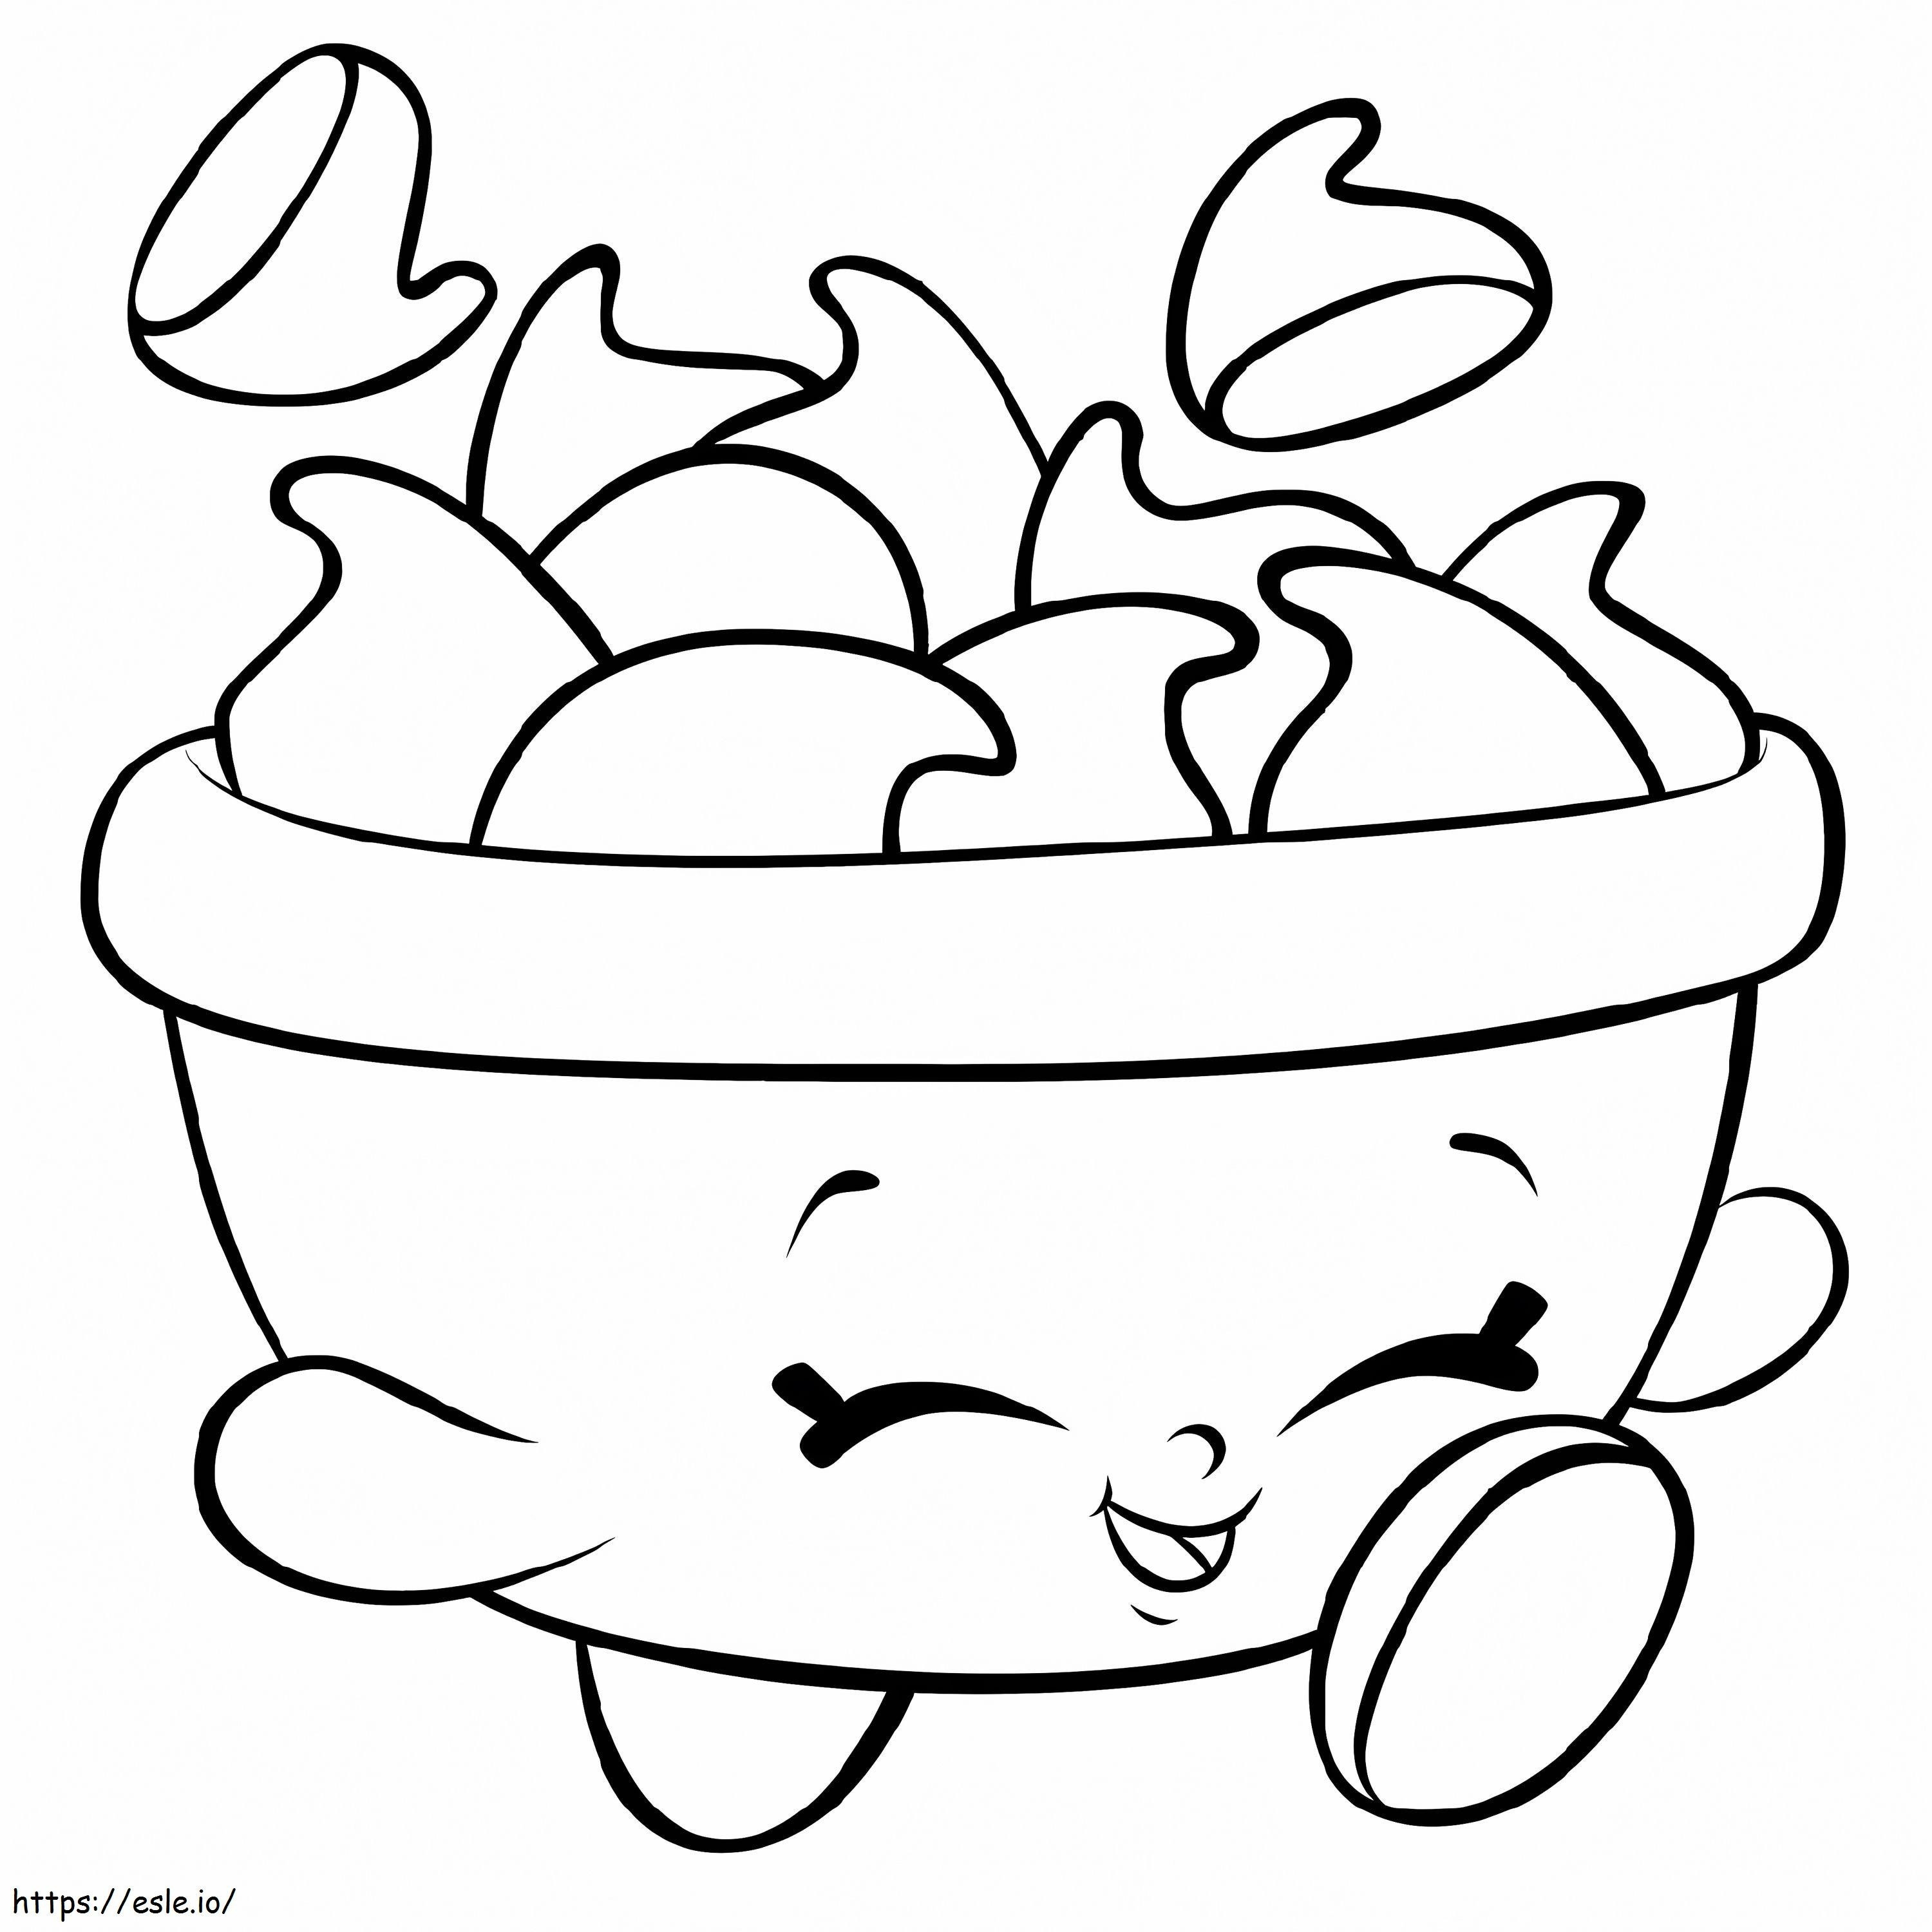 Choc Chips Shopkin coloring page